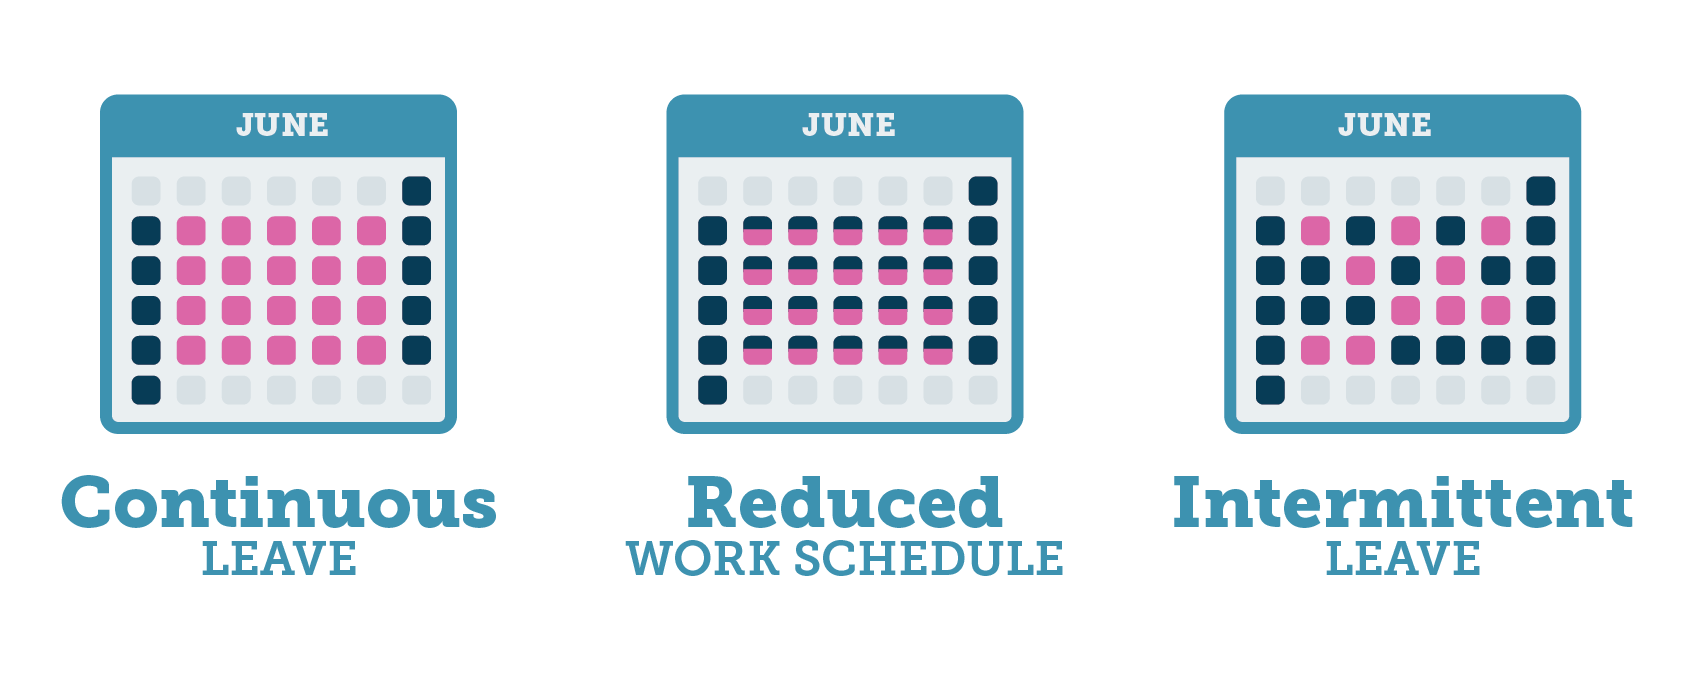 Infographic displaying continuous leave, reduced work schedule, and intermittent leave.